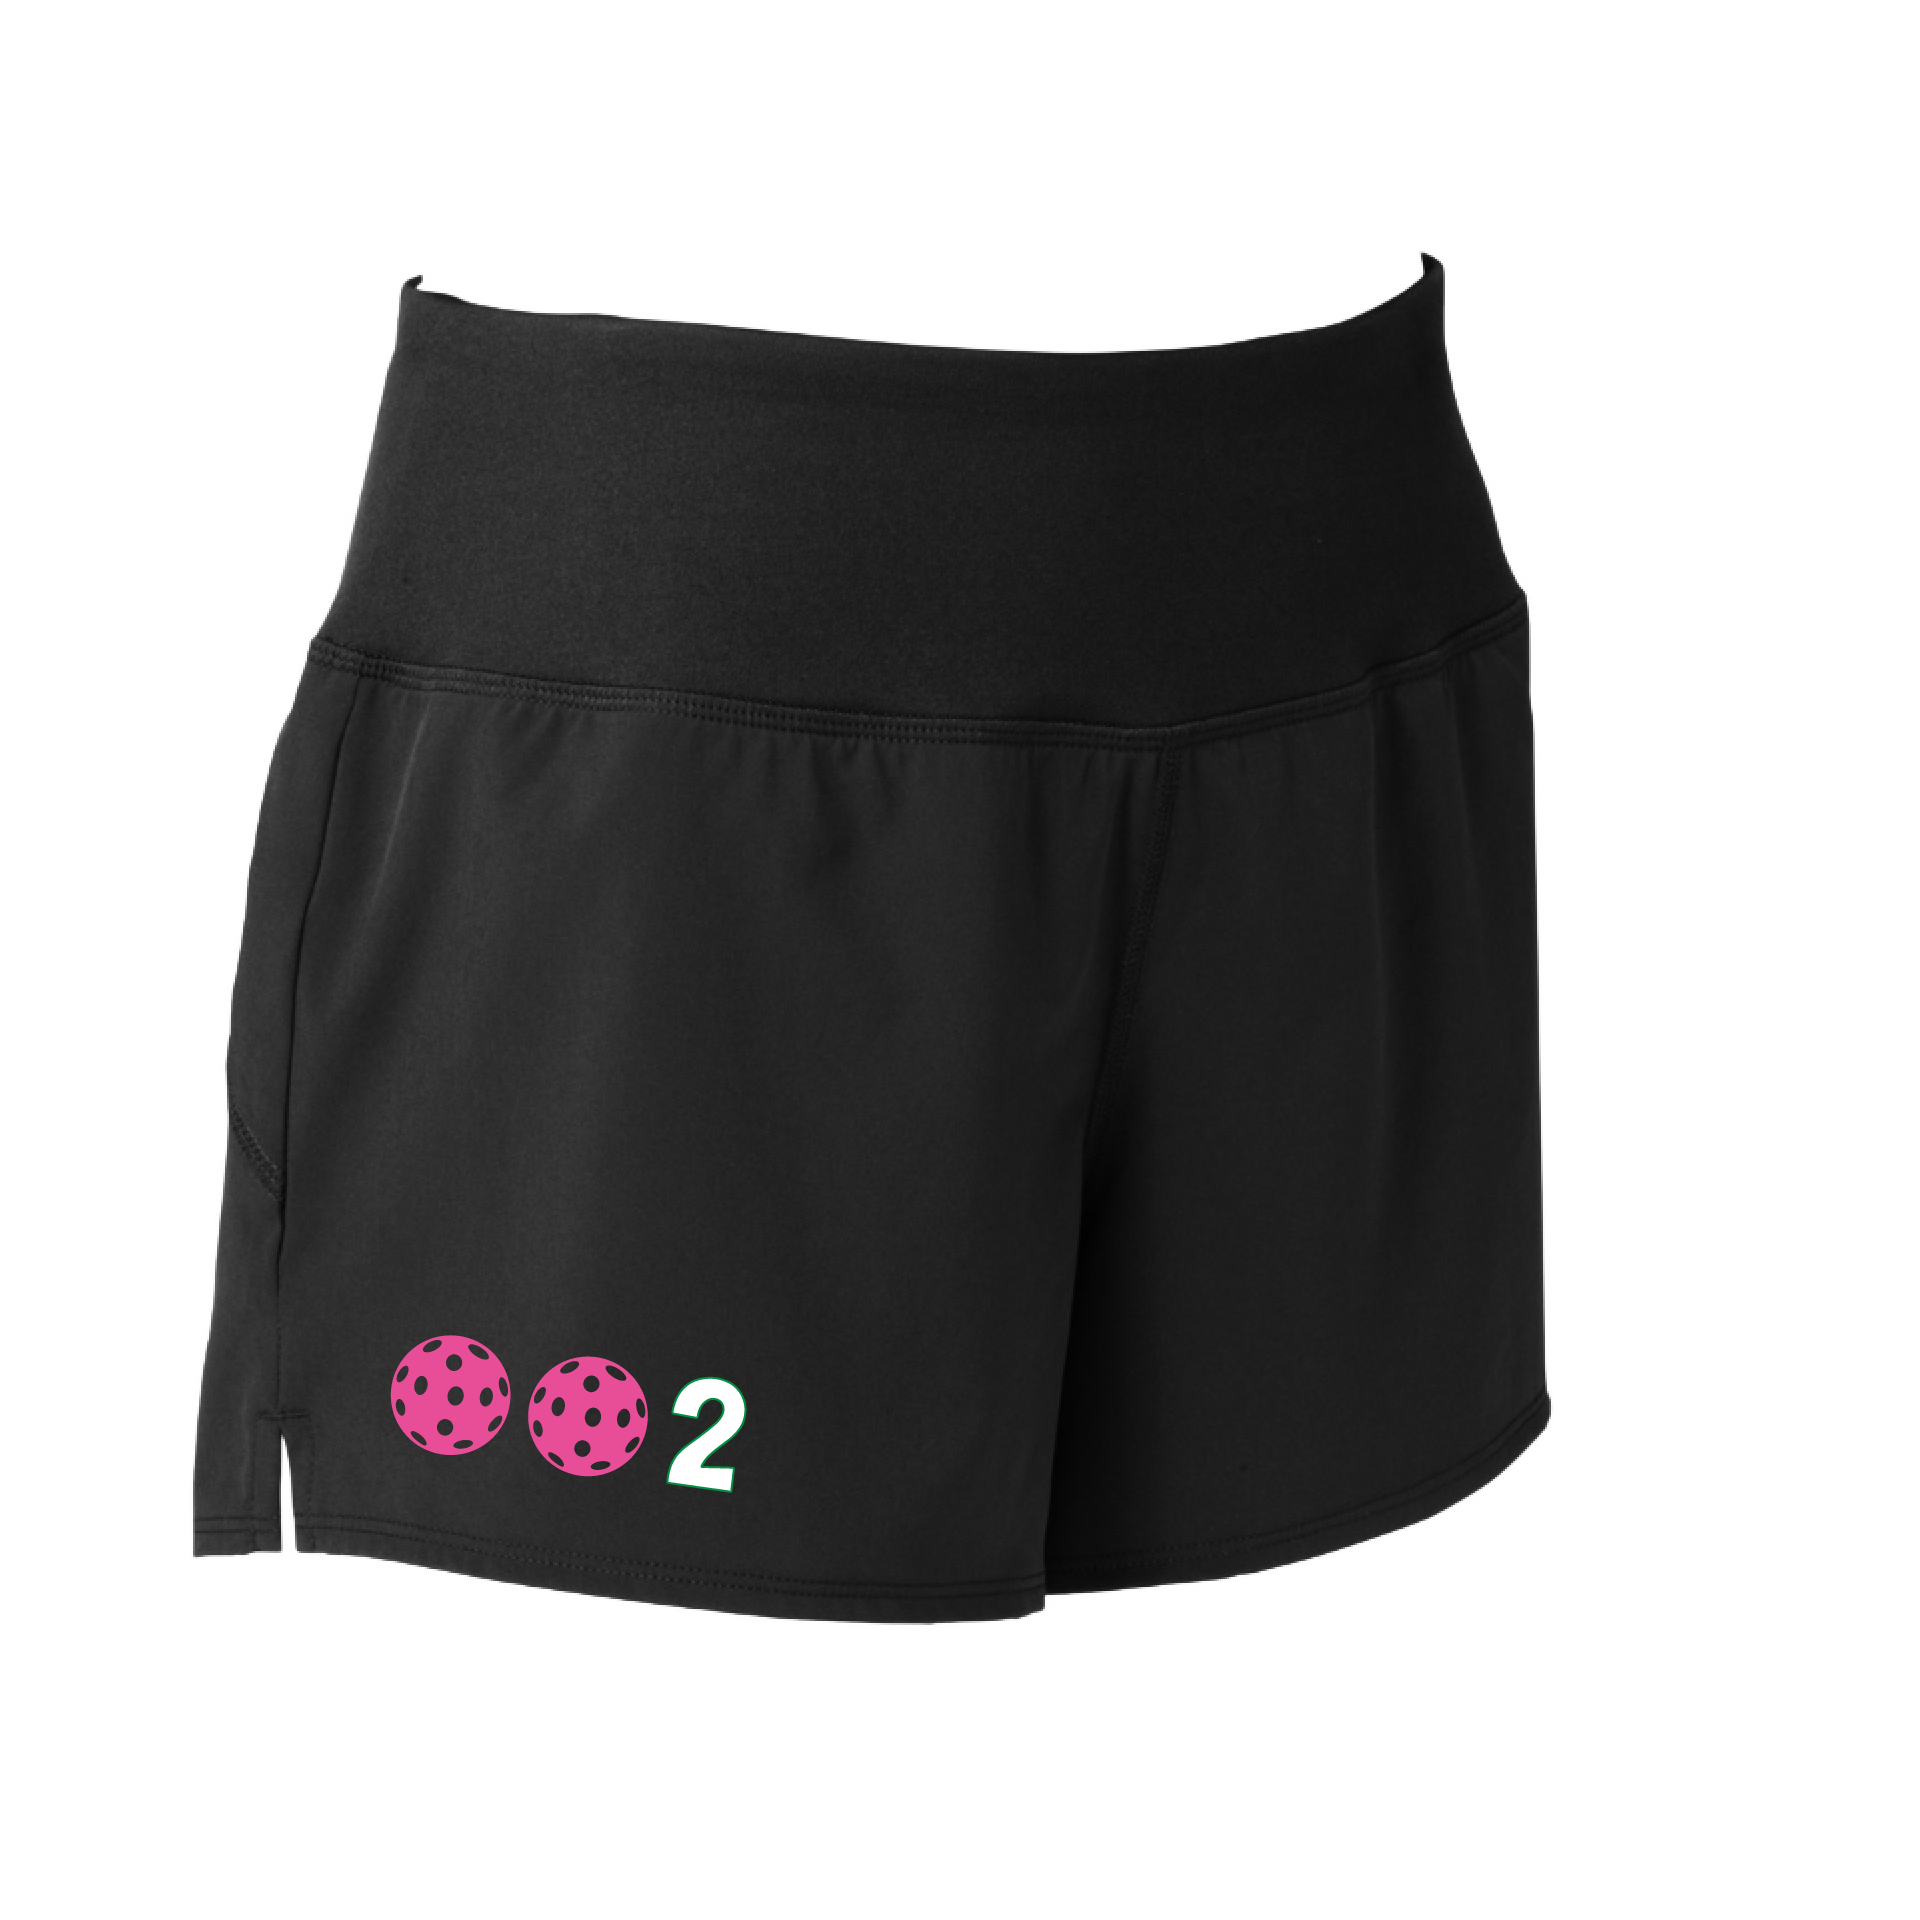 Designs: 002 with customizable Pickleballs (Yellow, White, Pink, Green).  Sport Tek women’s repeat shorts come with built-in cell phone pocket on the exterior of the waistband. You can also feel secure knowing that no matter how strenuous the exercise, the shorts will remain in place (it won’t ride up!). These shorts are extremely versatile and trendy. Transition from the Pickleball court to running errands smoothly